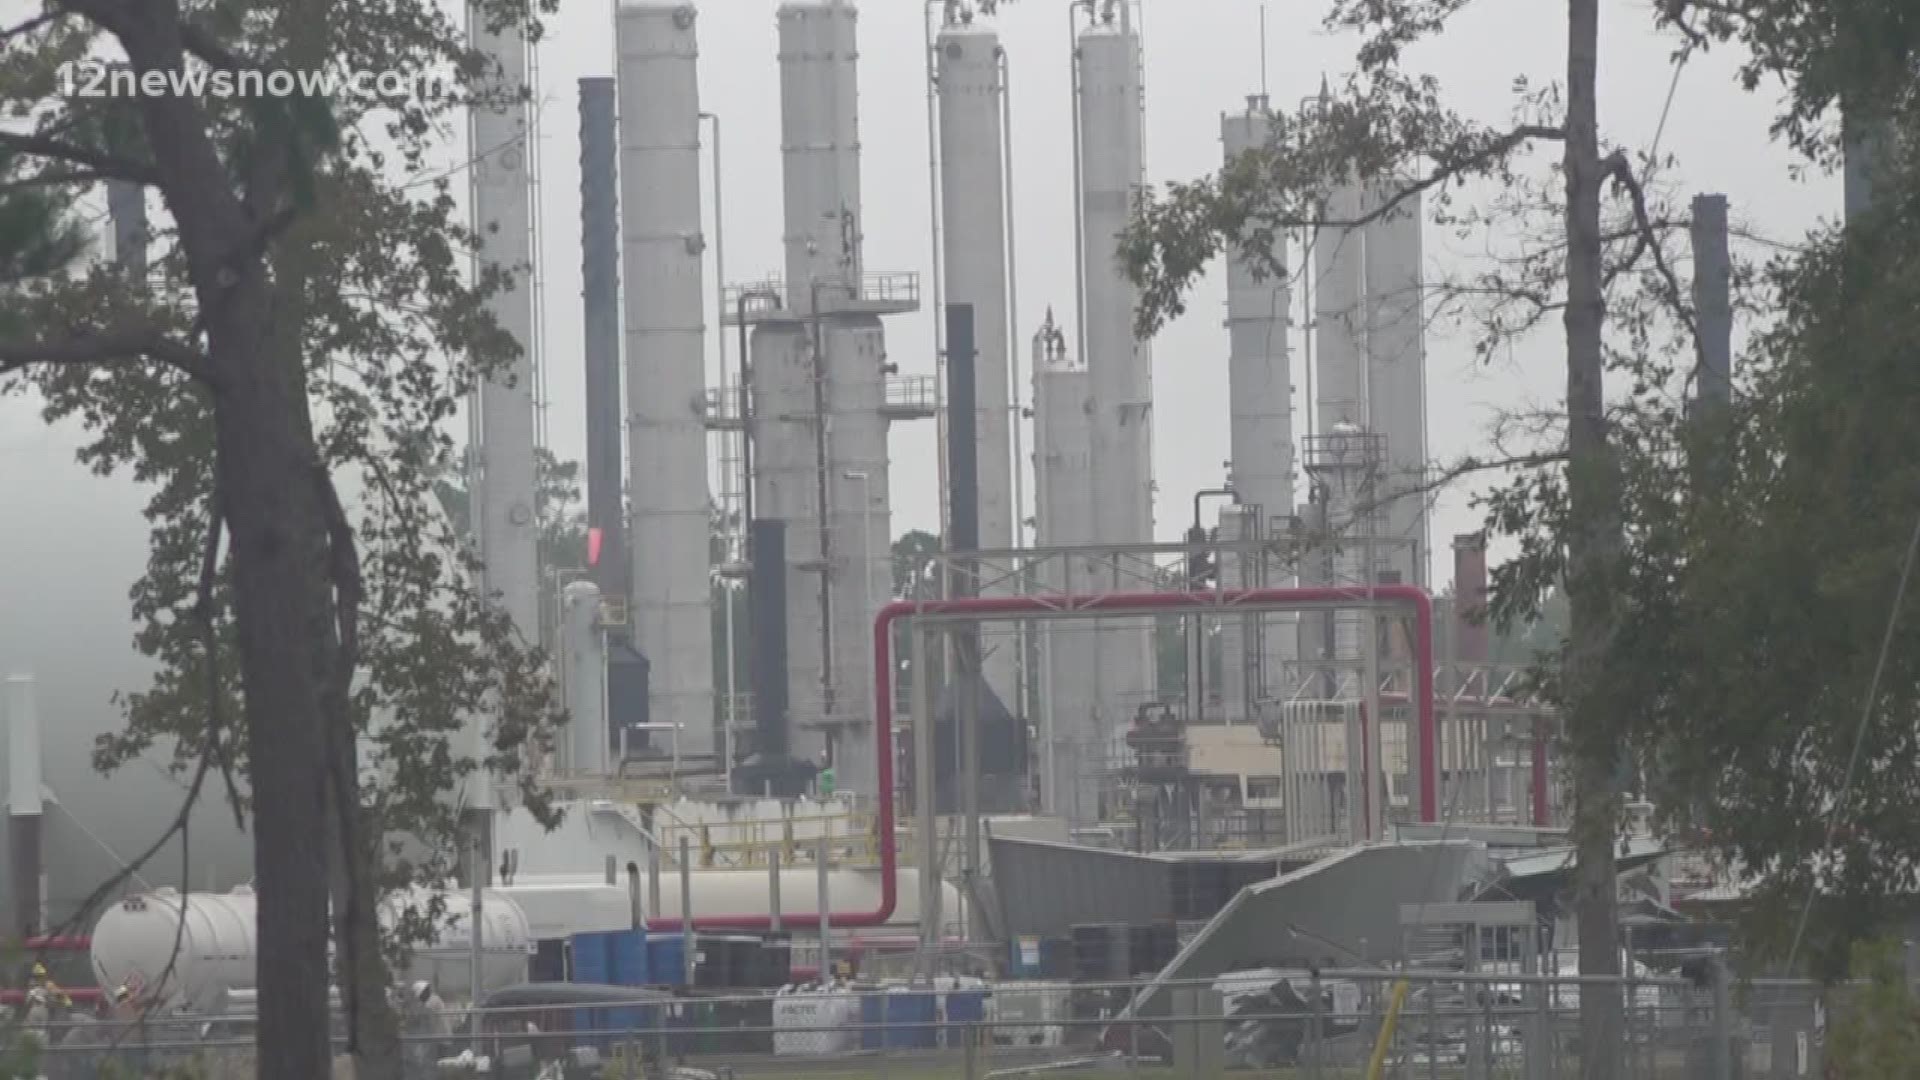 A thunderstorm on Oct. 29, 2019 caused a leak in a storage tank at a Silsbee refinery causing a brief shelter in place and temporary closure on Highway 418.